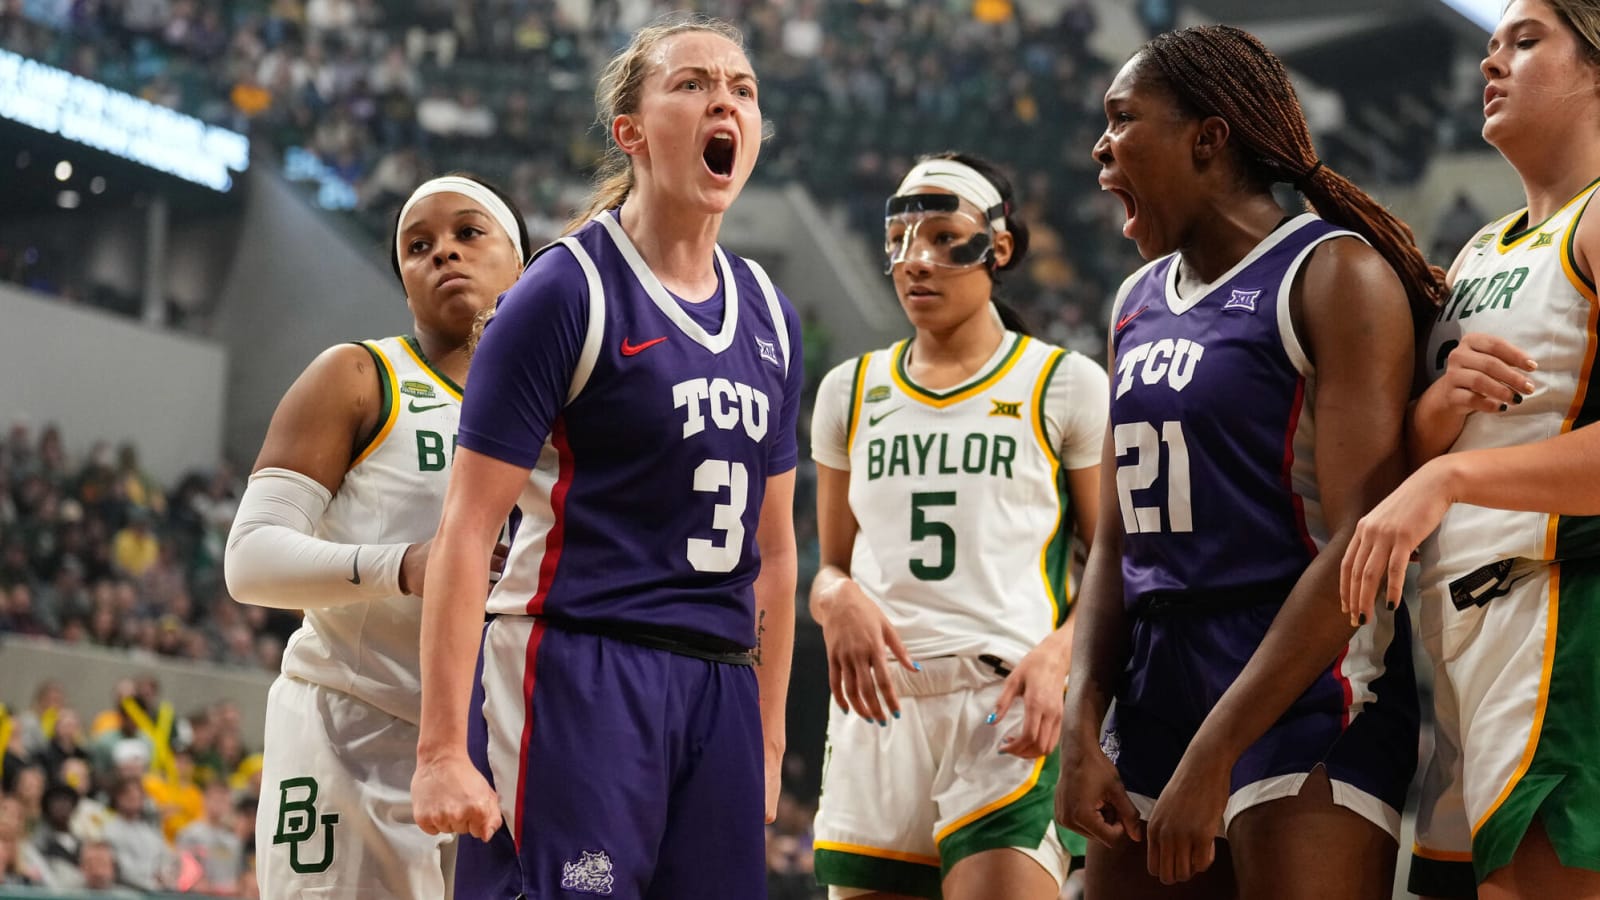 Injuries force TCU's women's basketball cancels games, holds tryouts